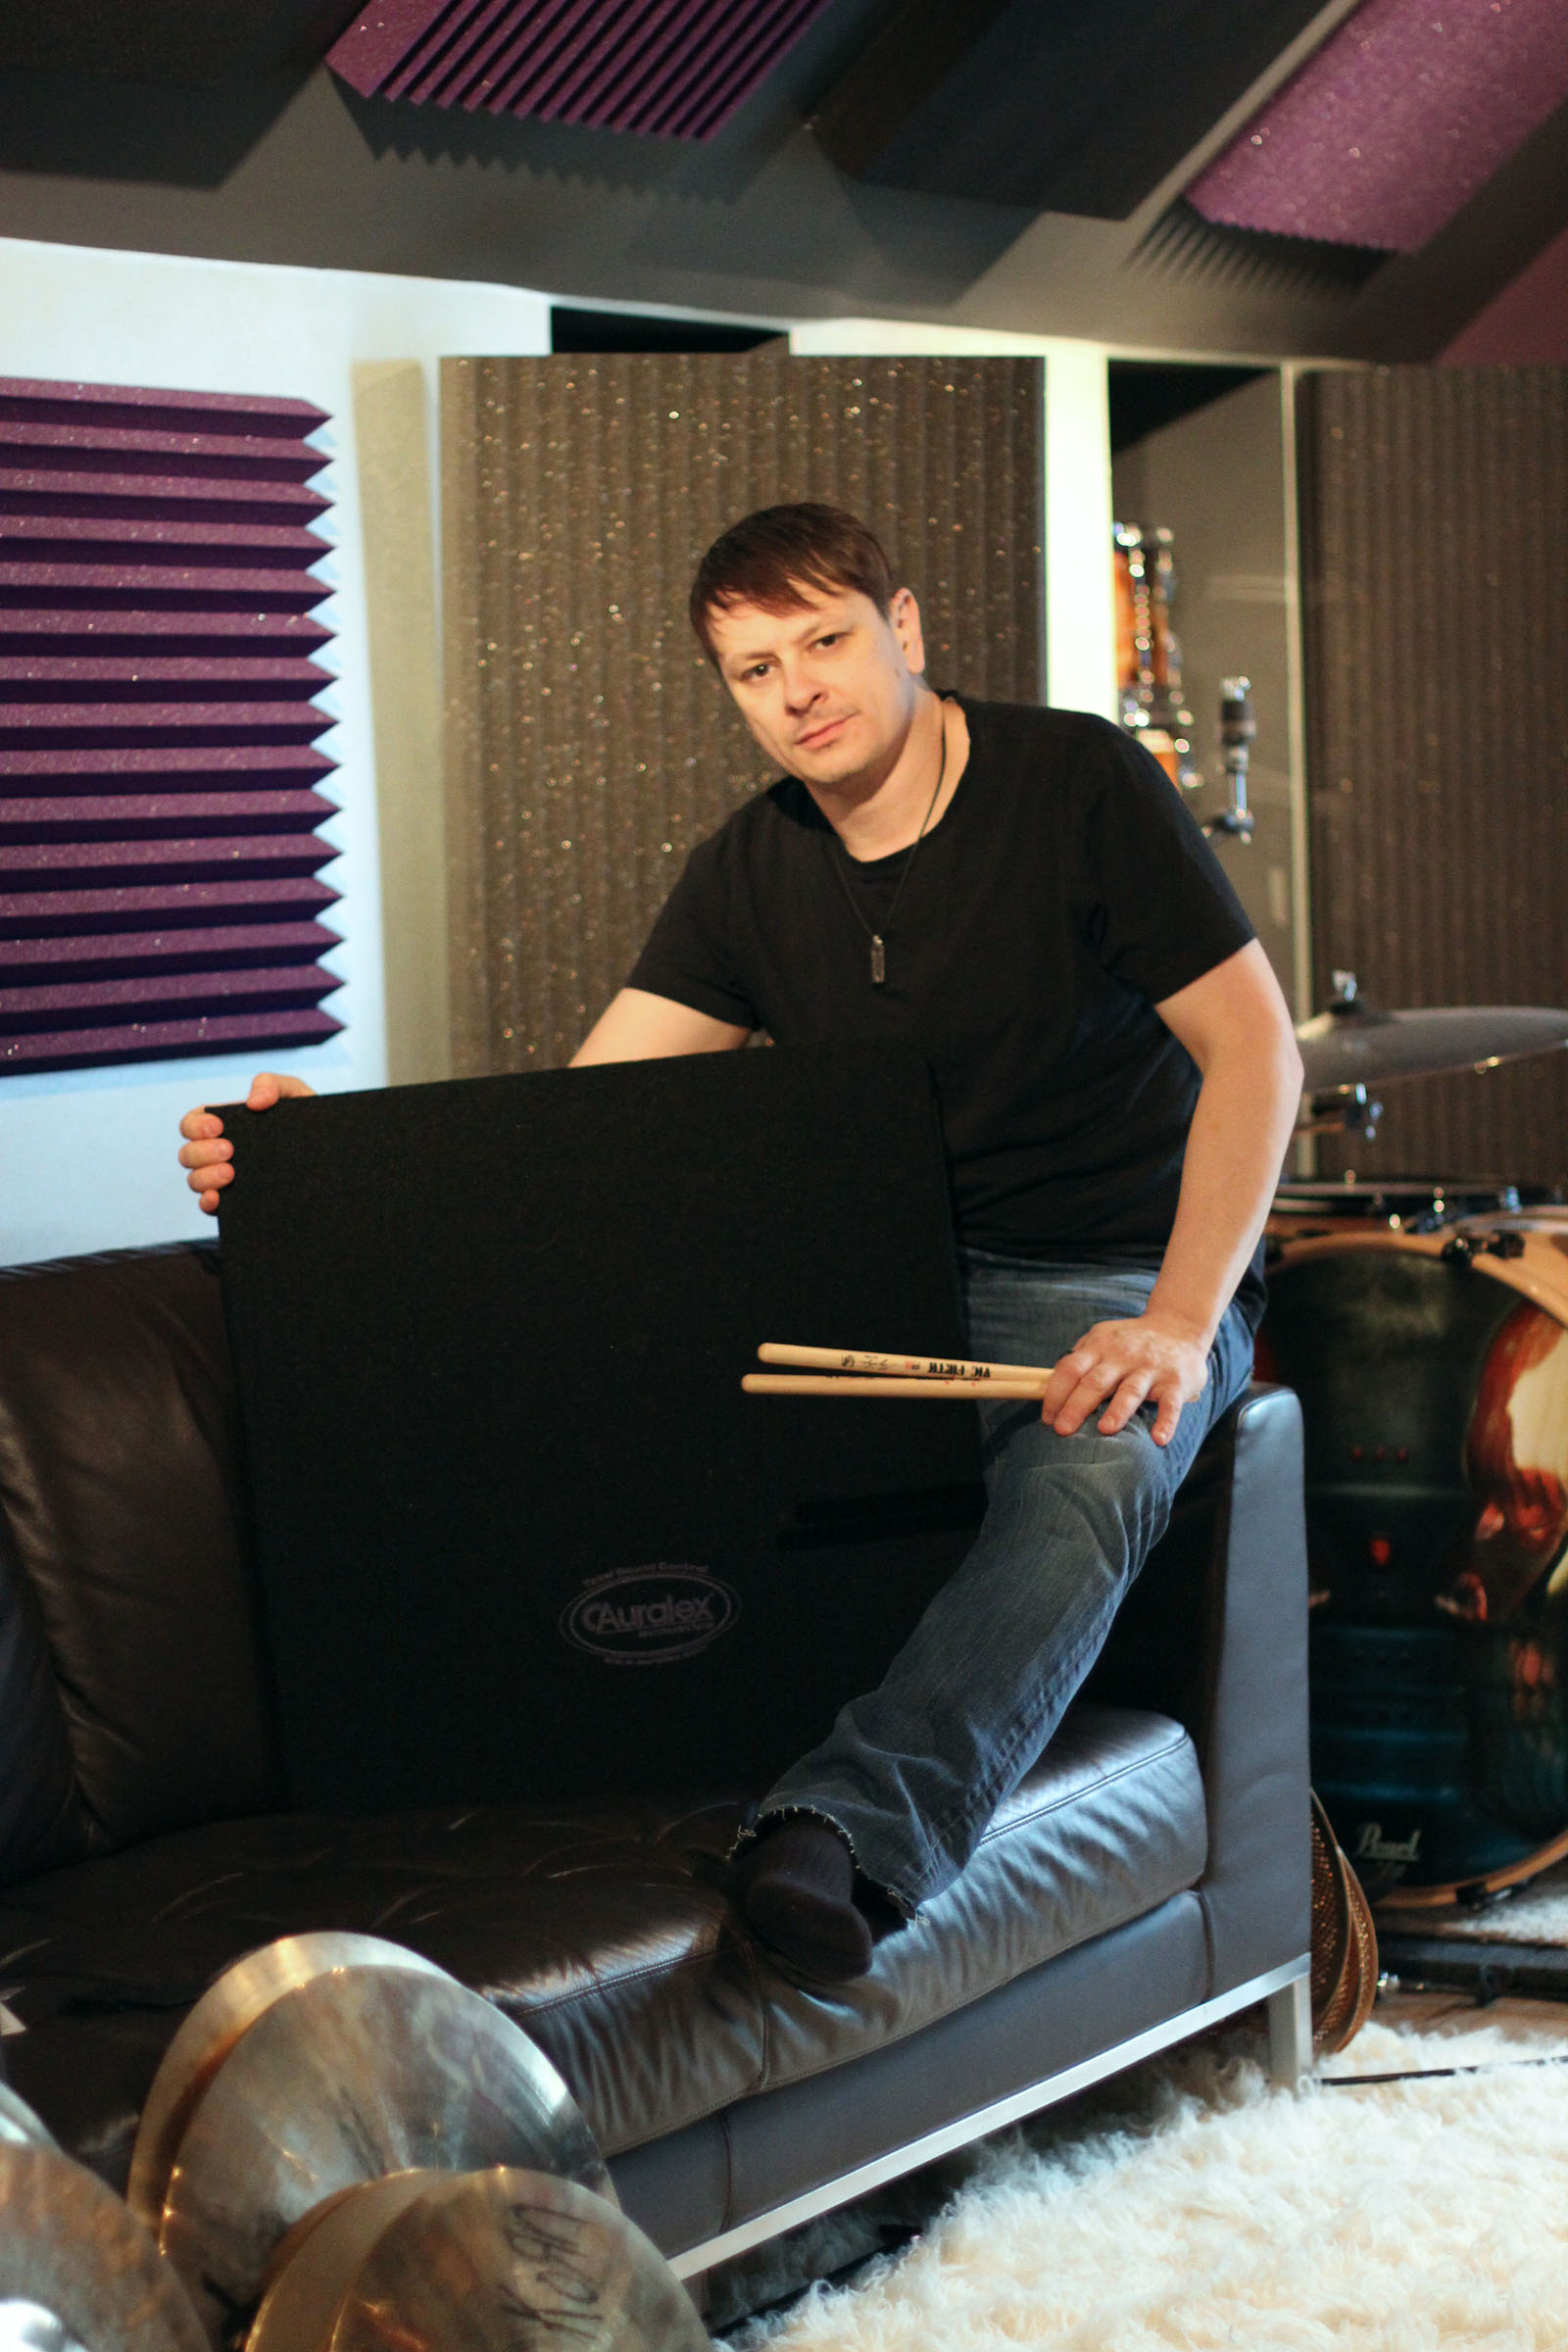 Ray Luzier, pictured in his drum room/studio, outfitted with Auralex® acoustical treatment